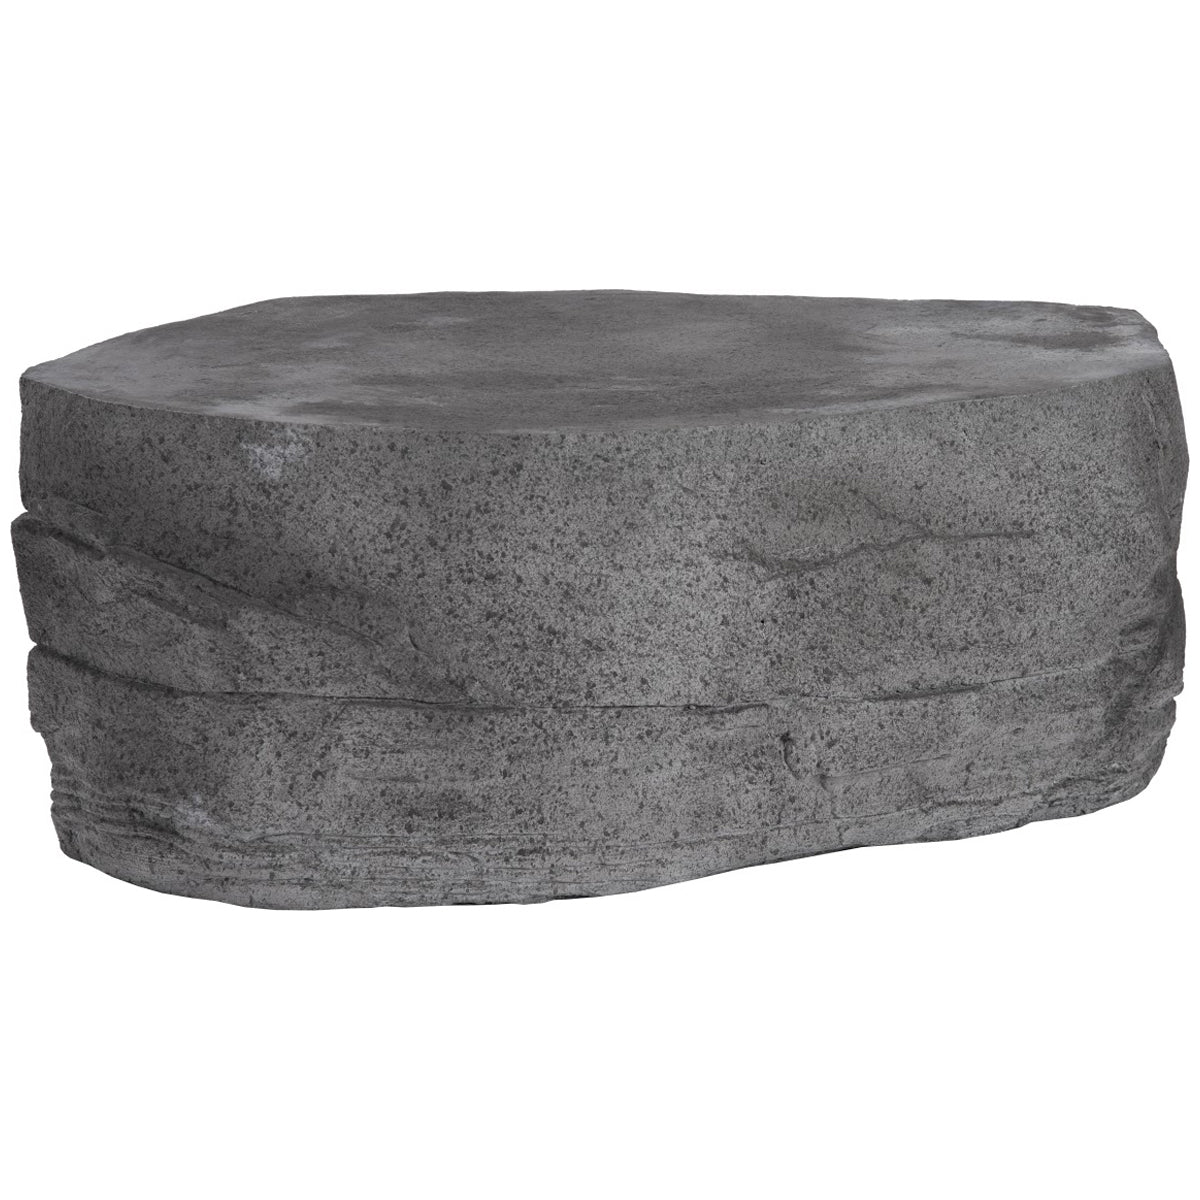 Phillips Collection Grand Canyon Large Outdoor Coffee Table